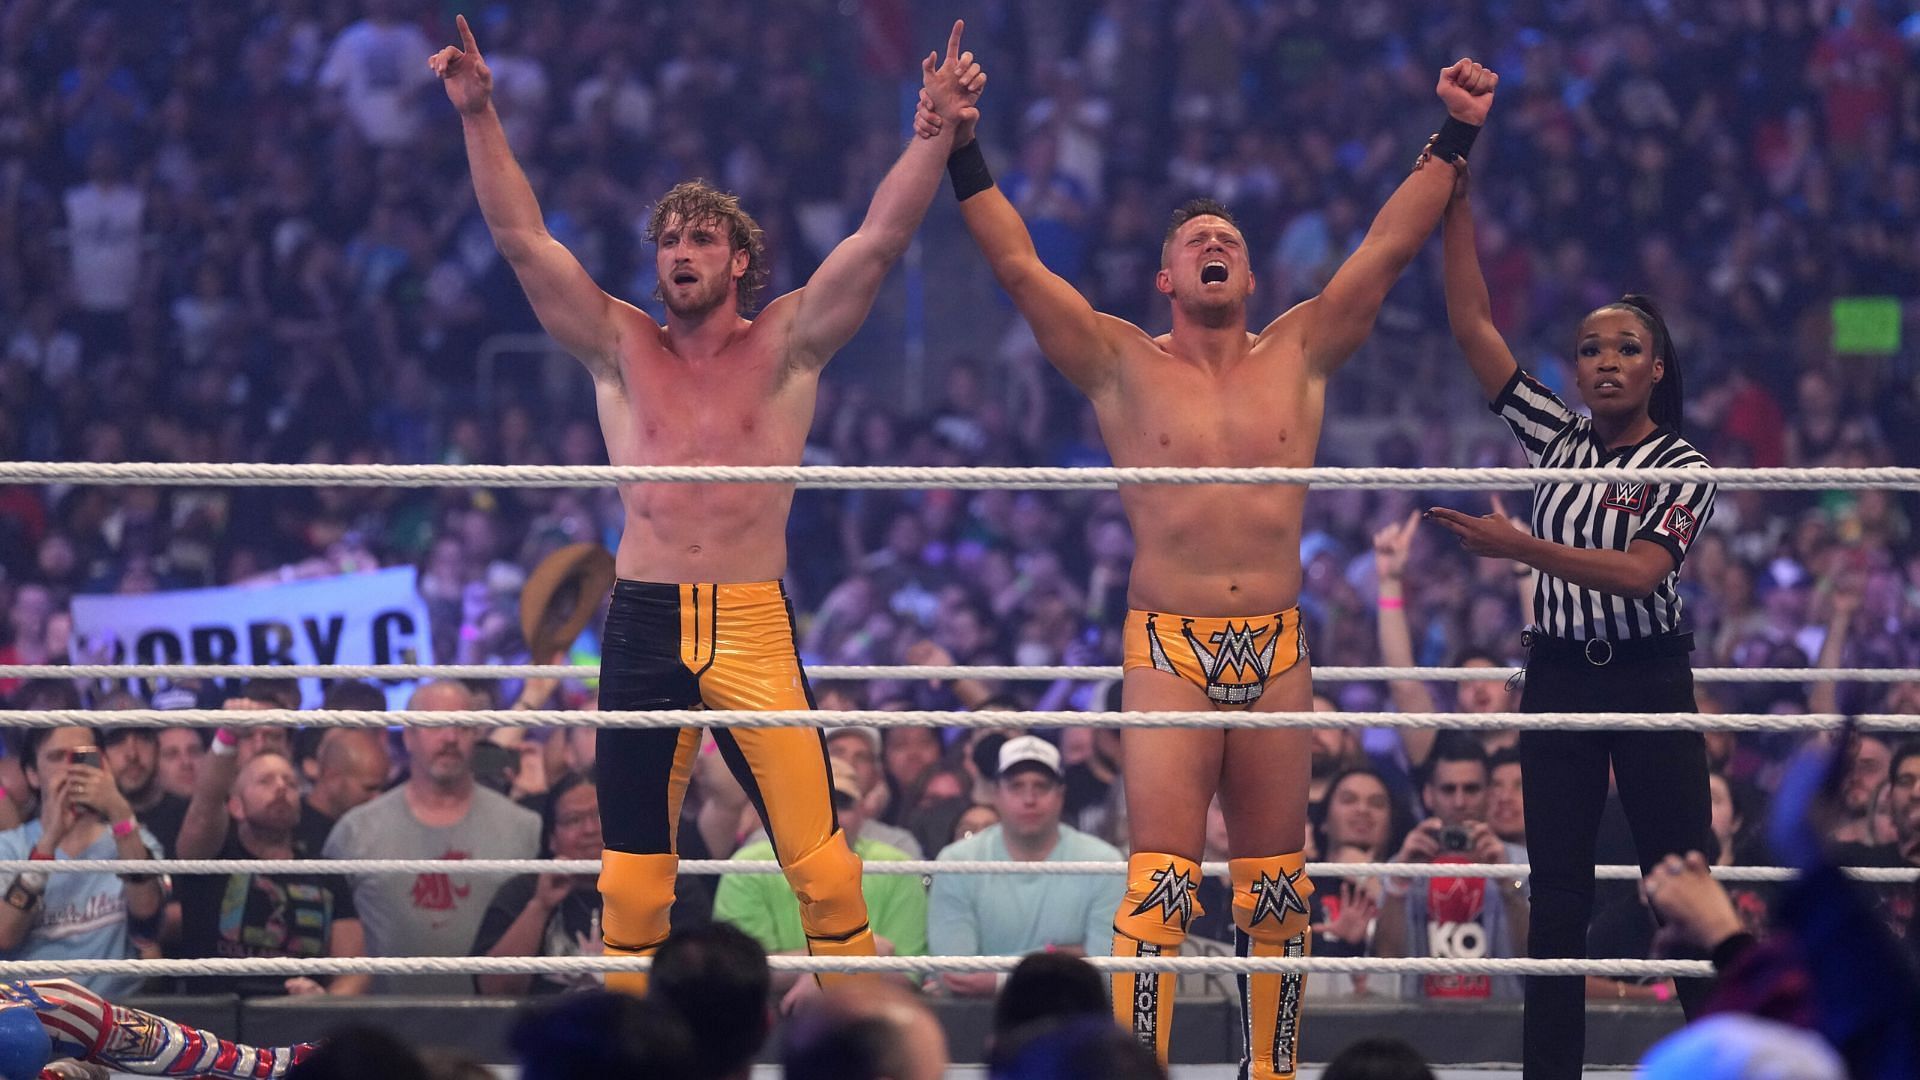 Logan Paul and The Miz defeated The Mysterios at WrestleMania 38